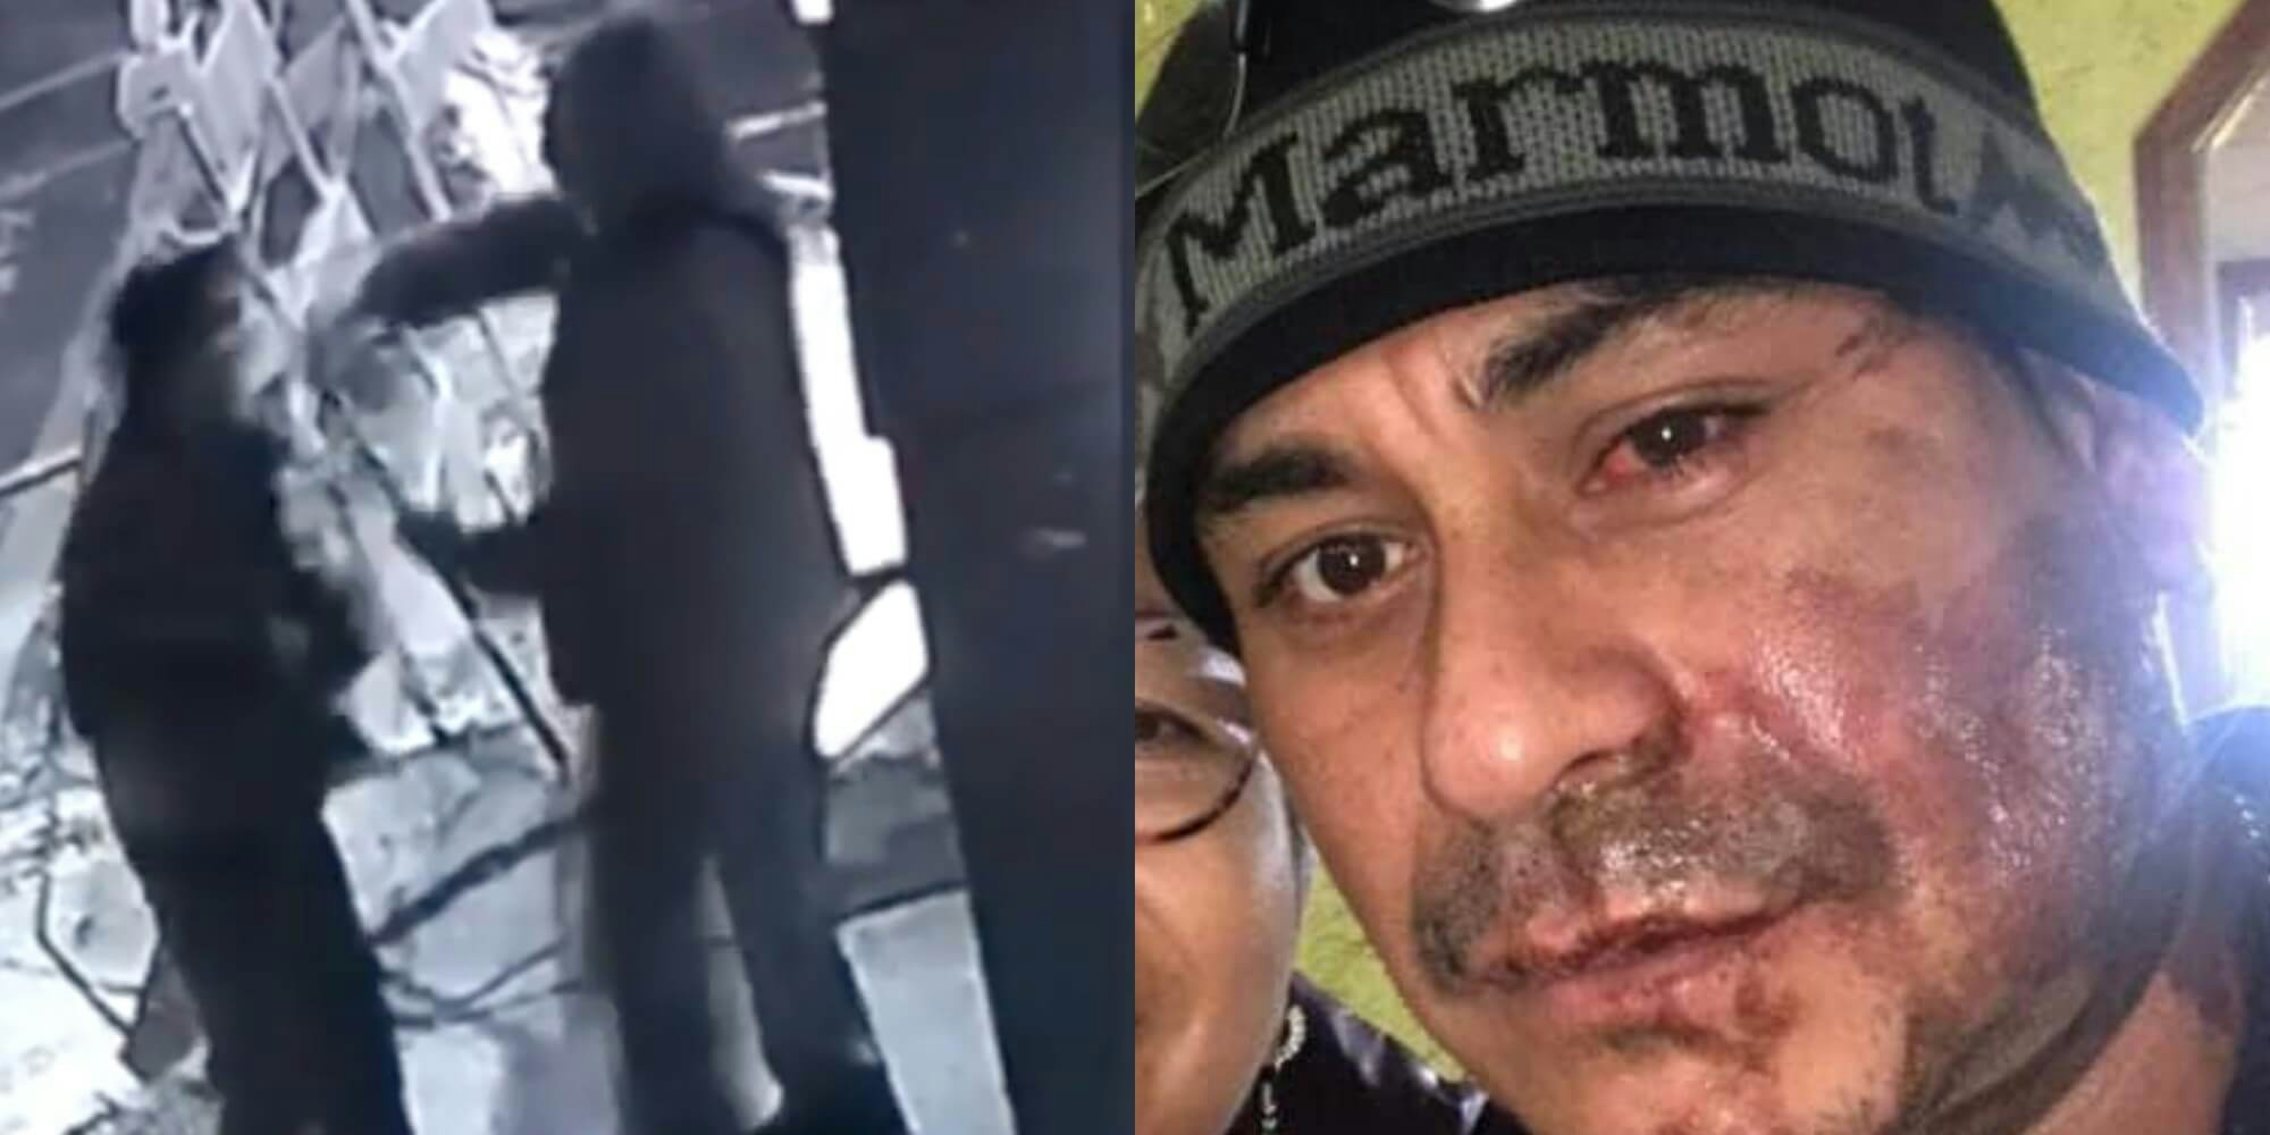 Left: white man seen throwing acid on the face of Mahud Villalaz, right: Mahud Villalaz with second degree burns on his face